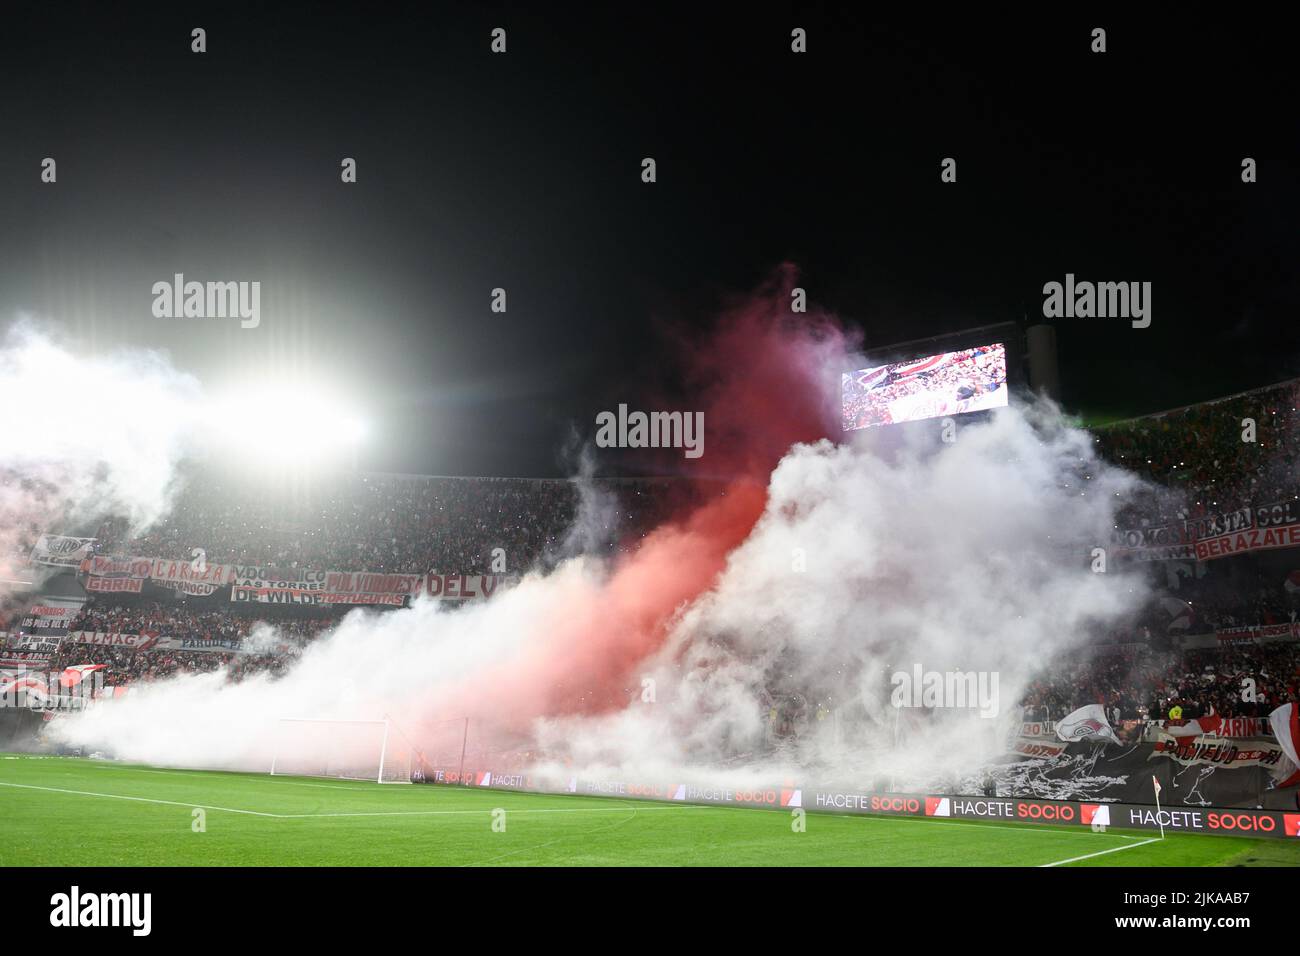 See a River Plate game at El Monumental in Buenos Aires